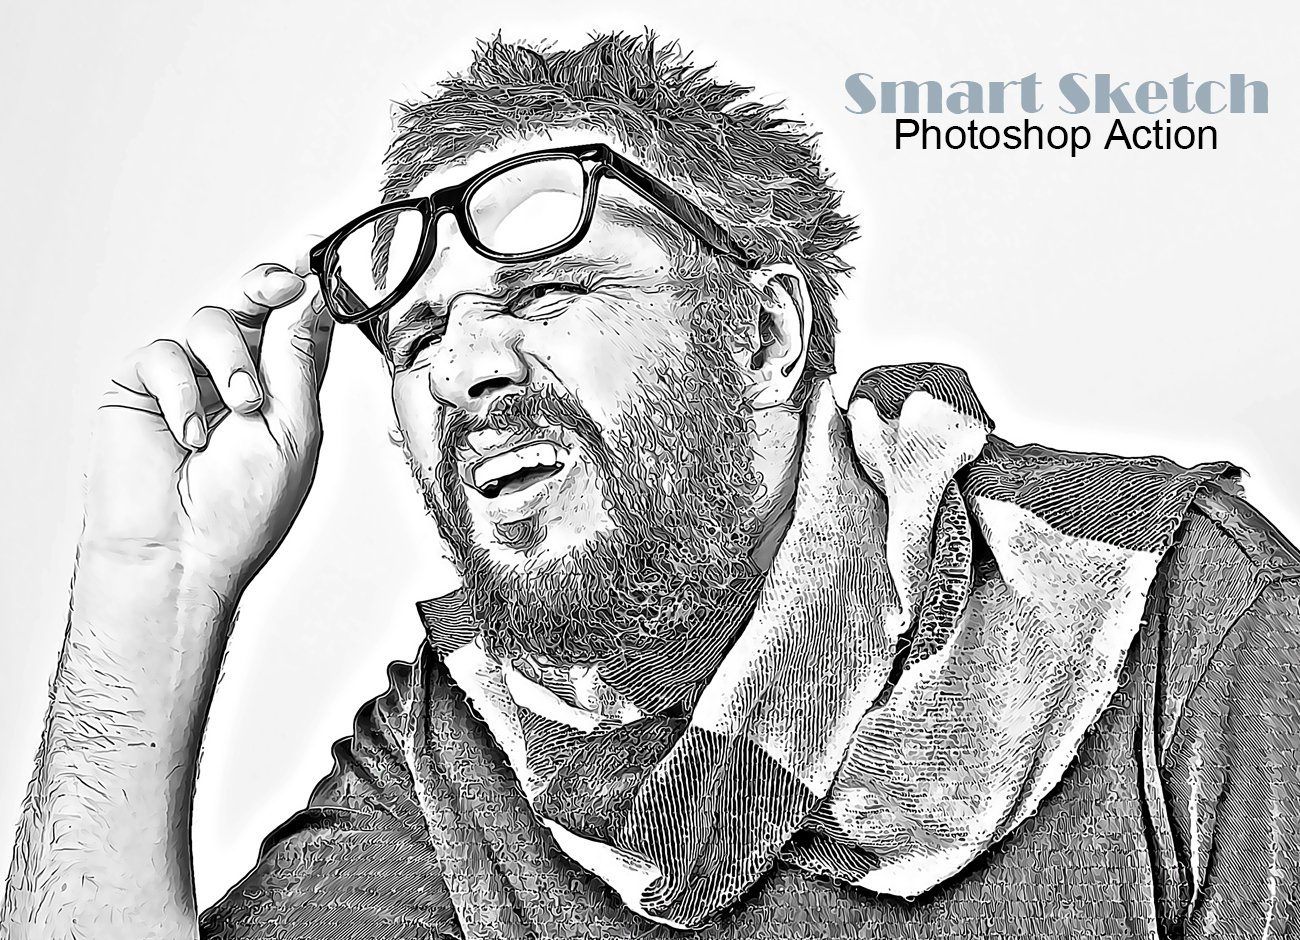 Smart Sketch Photoshop Actioncover image.